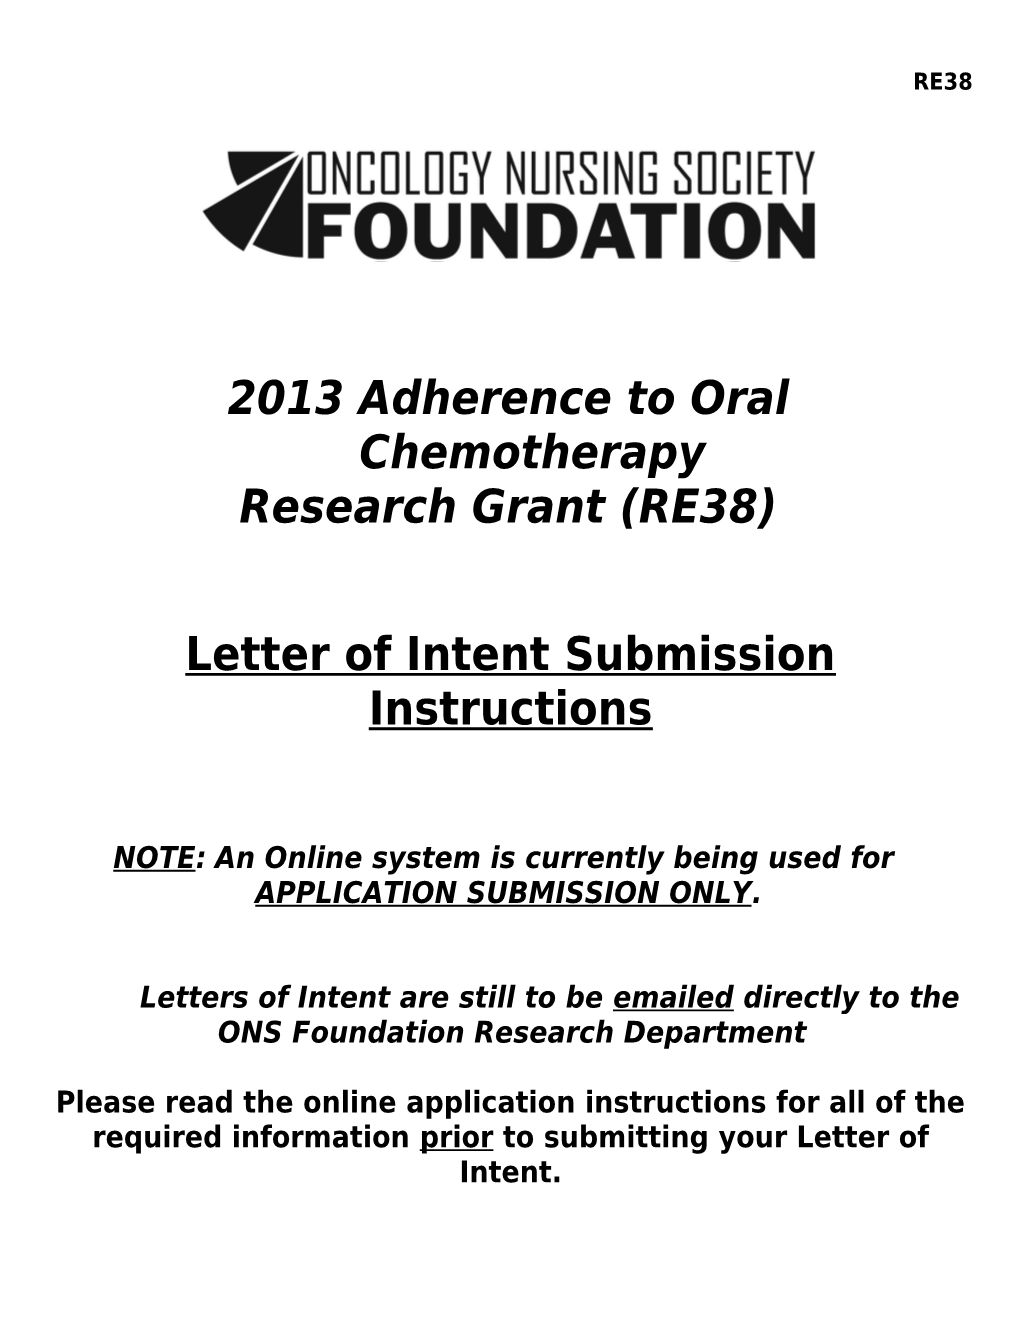 Letter of Intent Submission Instructions